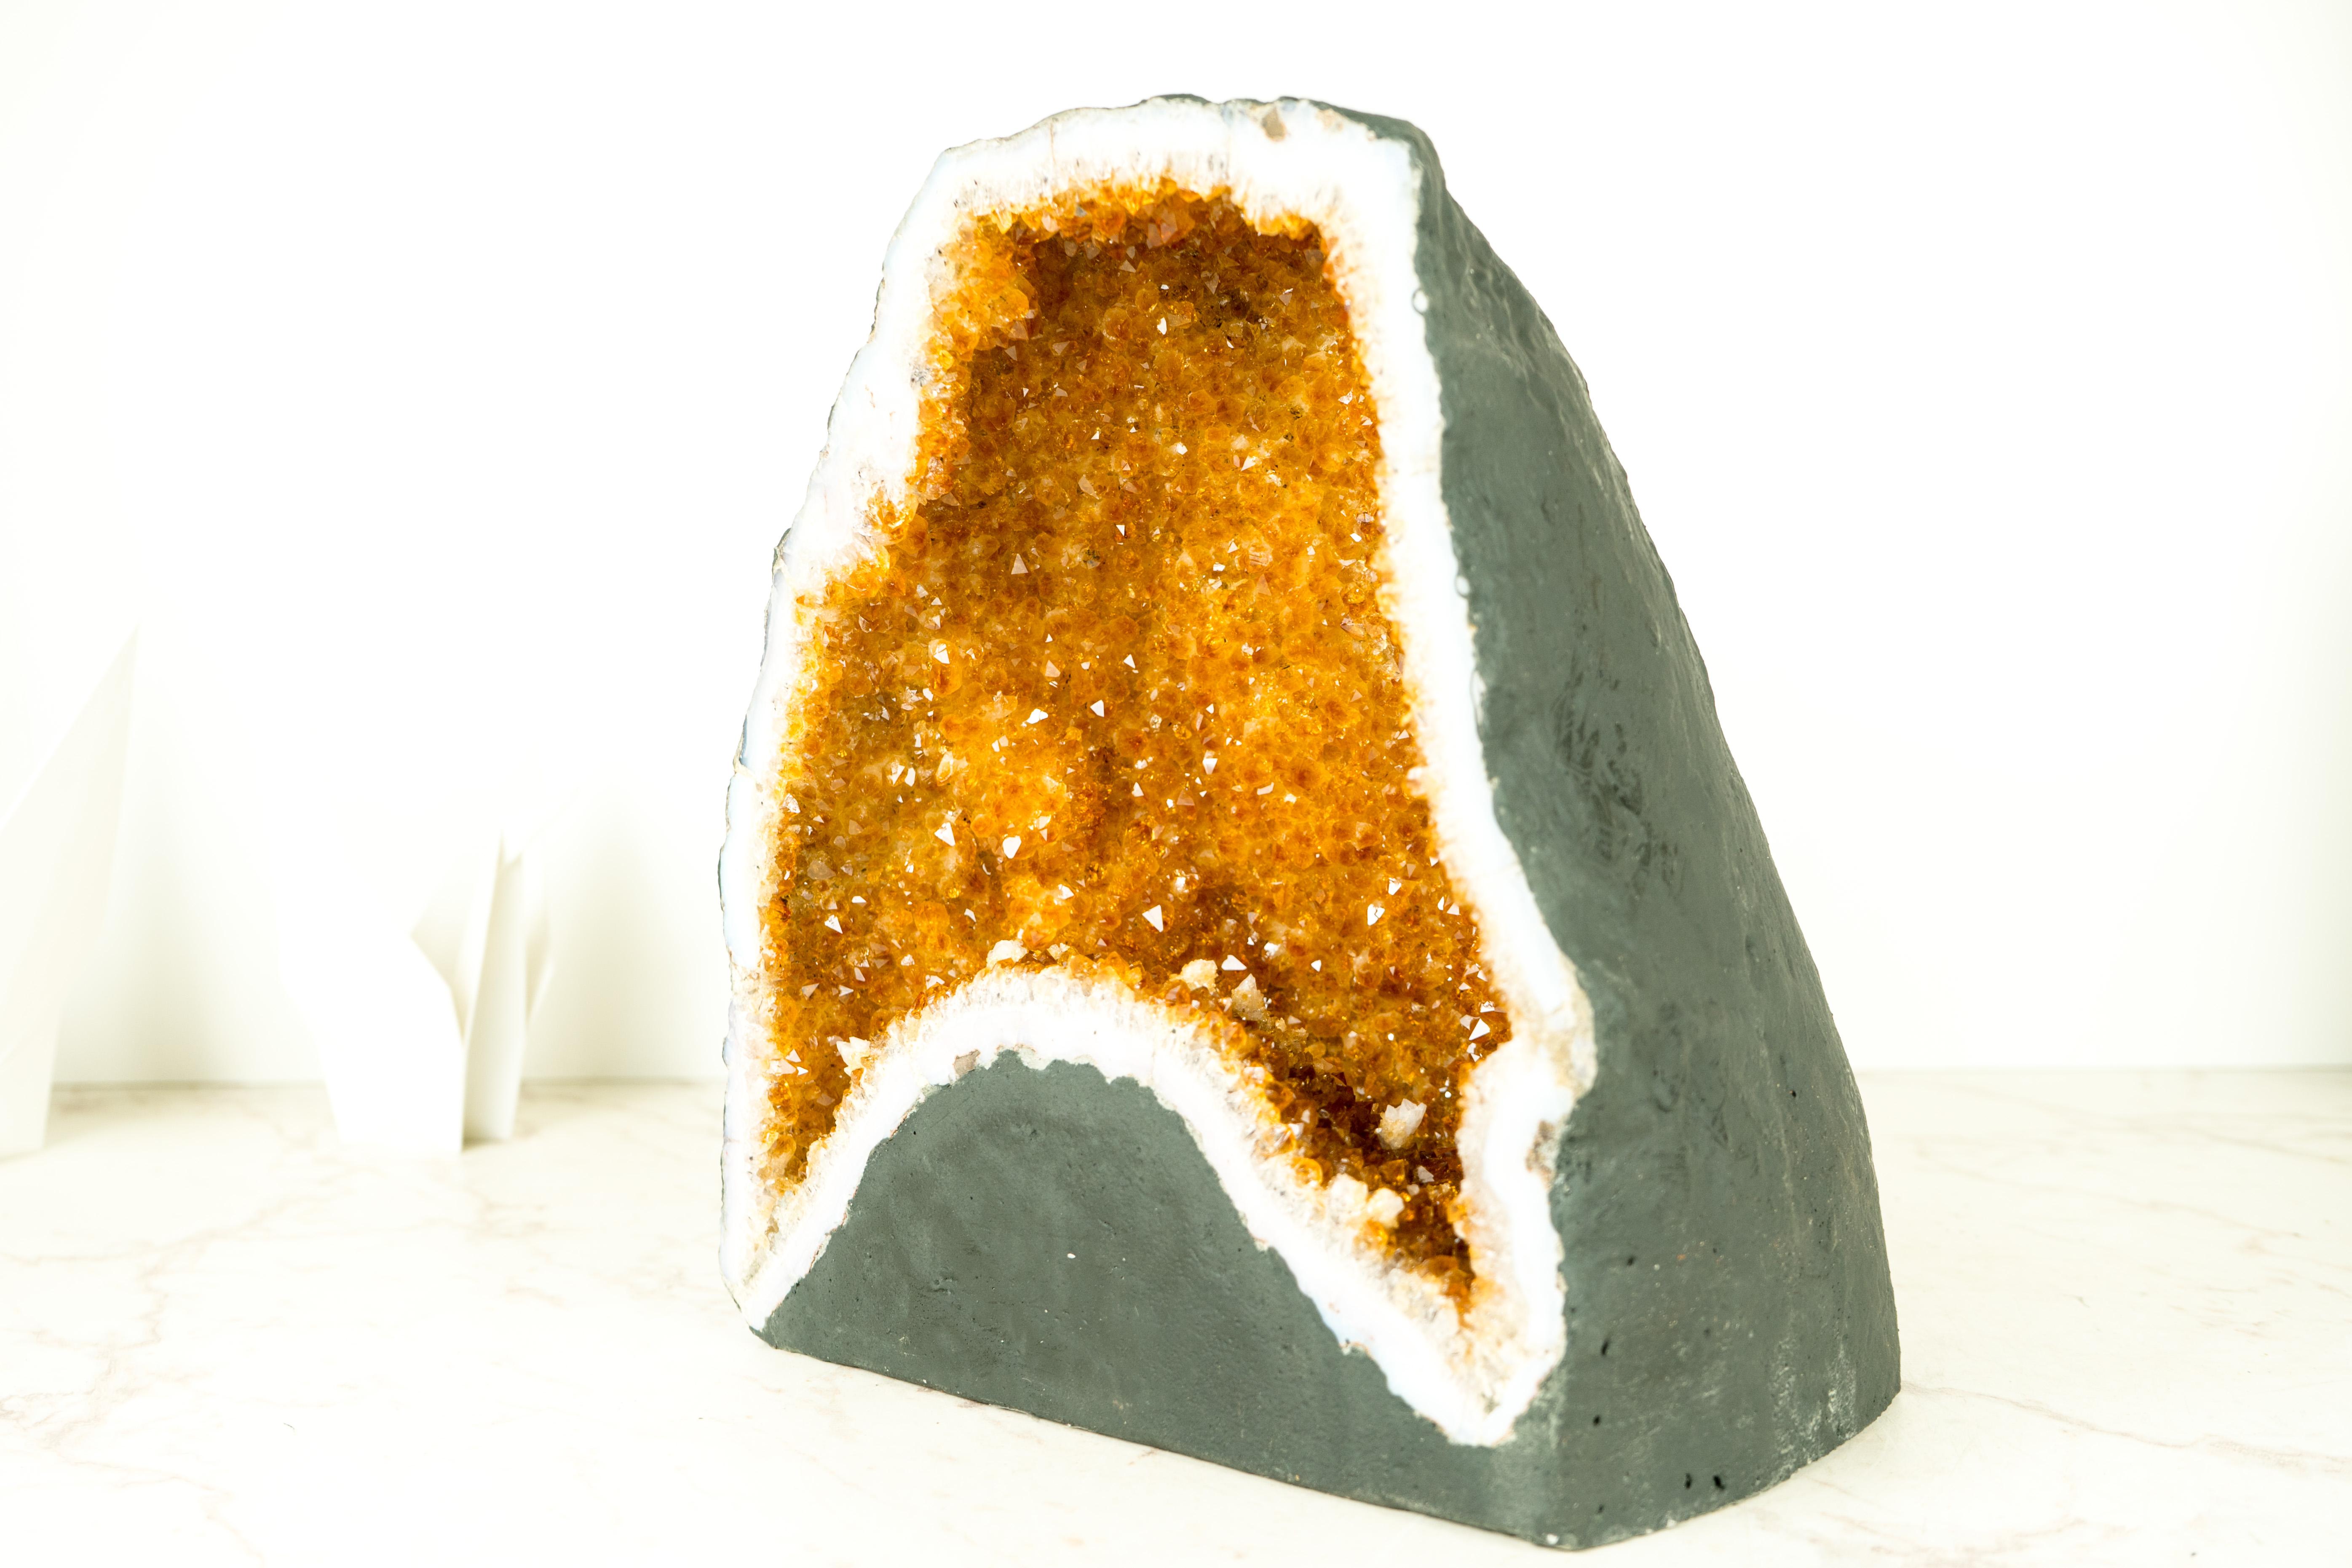 A Breathtaking Citrine Geode Cave with Deep Orange, Sparkly Citrine Druzy and Calcite Inclusions

▫️ Description

An extraordinary natural Citrine cave, featuring shiny, rich, saturated orange Citrine Druzy and beautiful formation of Calcite